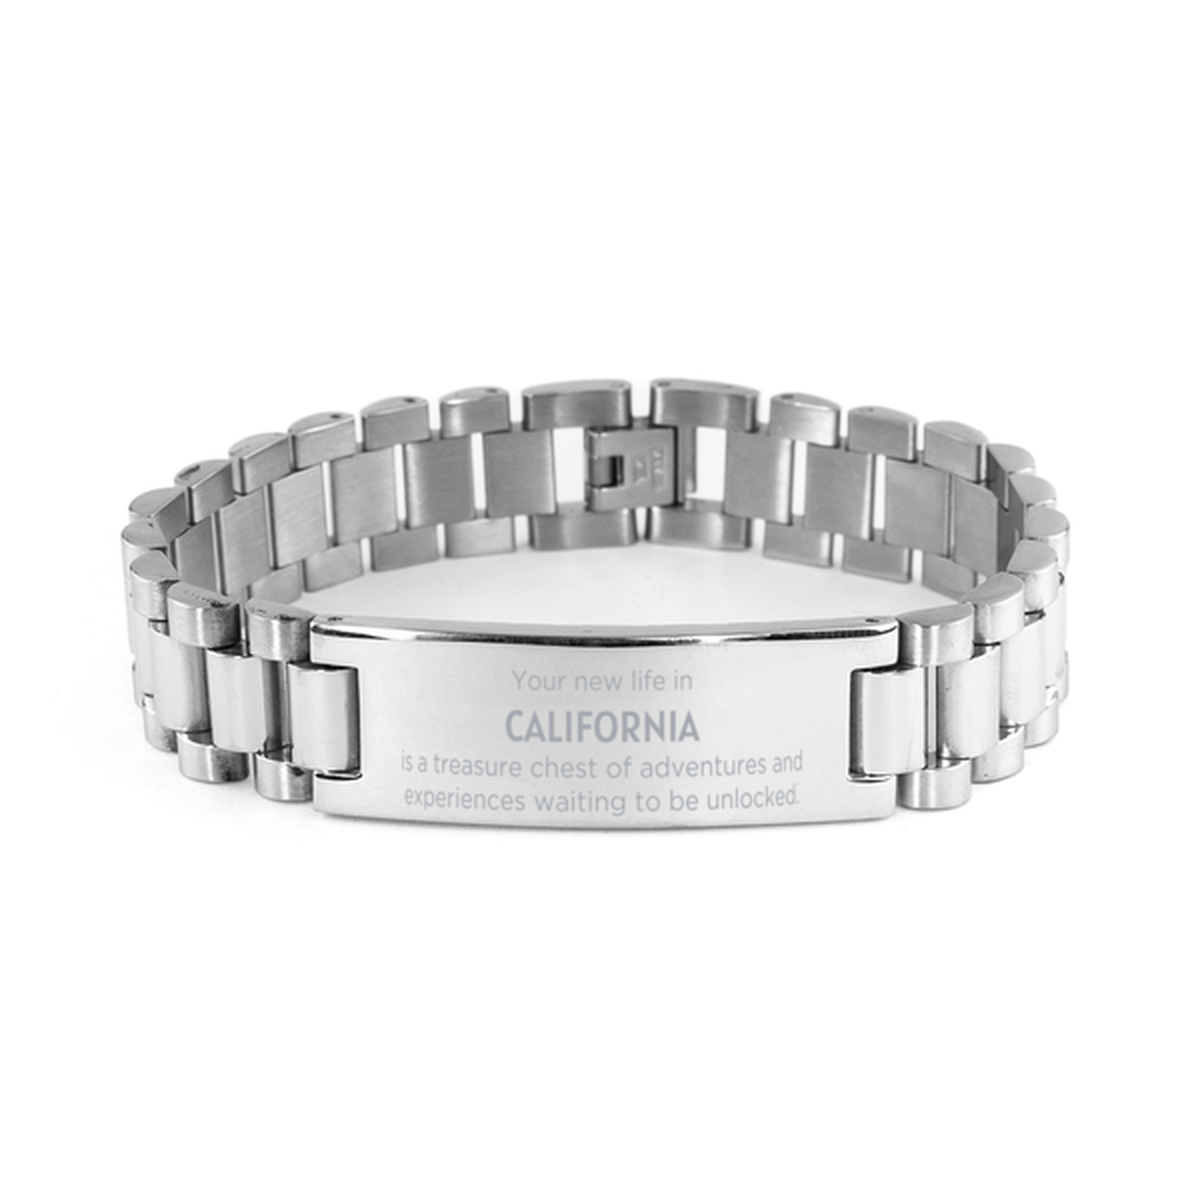 Moving to California Gifts, Your new life in California, Long Distance California Christmas Ladder Stainless Steel Bracelet For Men, Women, Friends, Coworkers